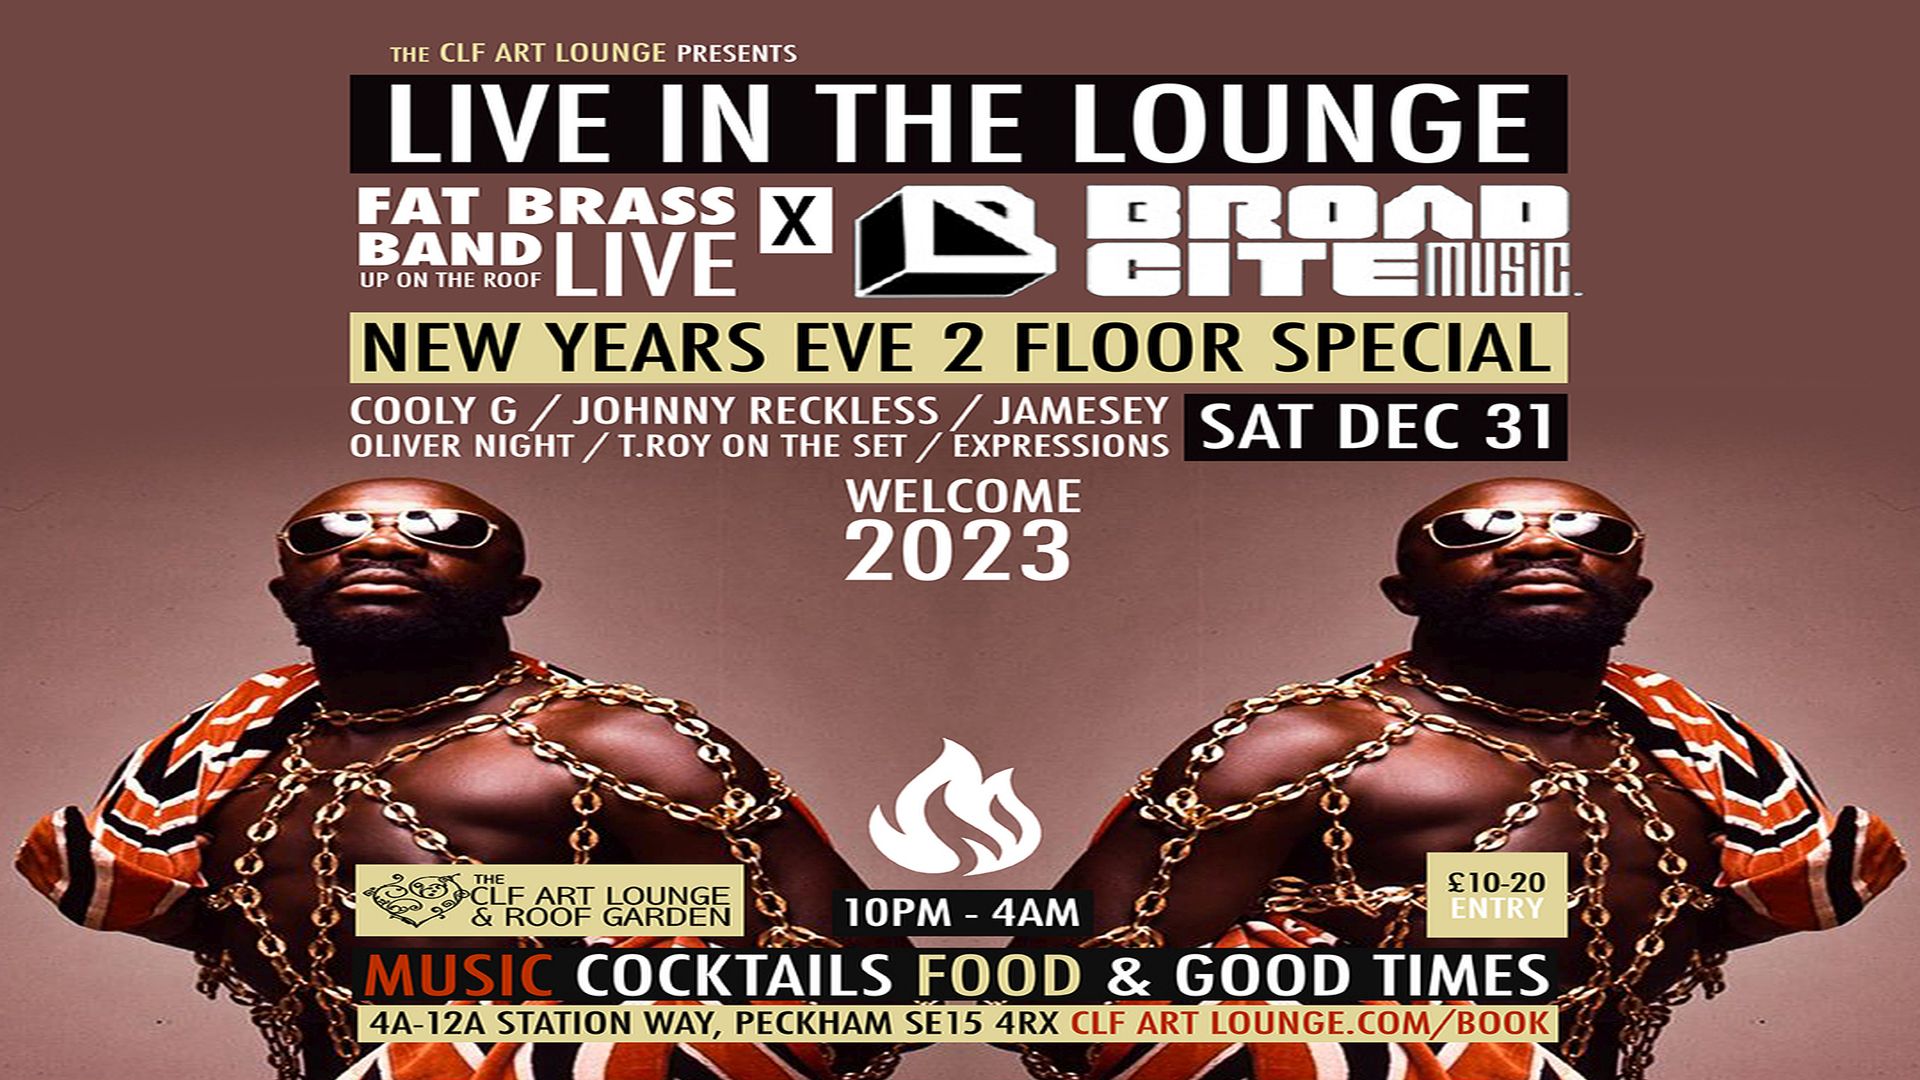 Live In The Lounge x Broadcite New Years Eve 2 Floor Special, London, England, United Kingdom